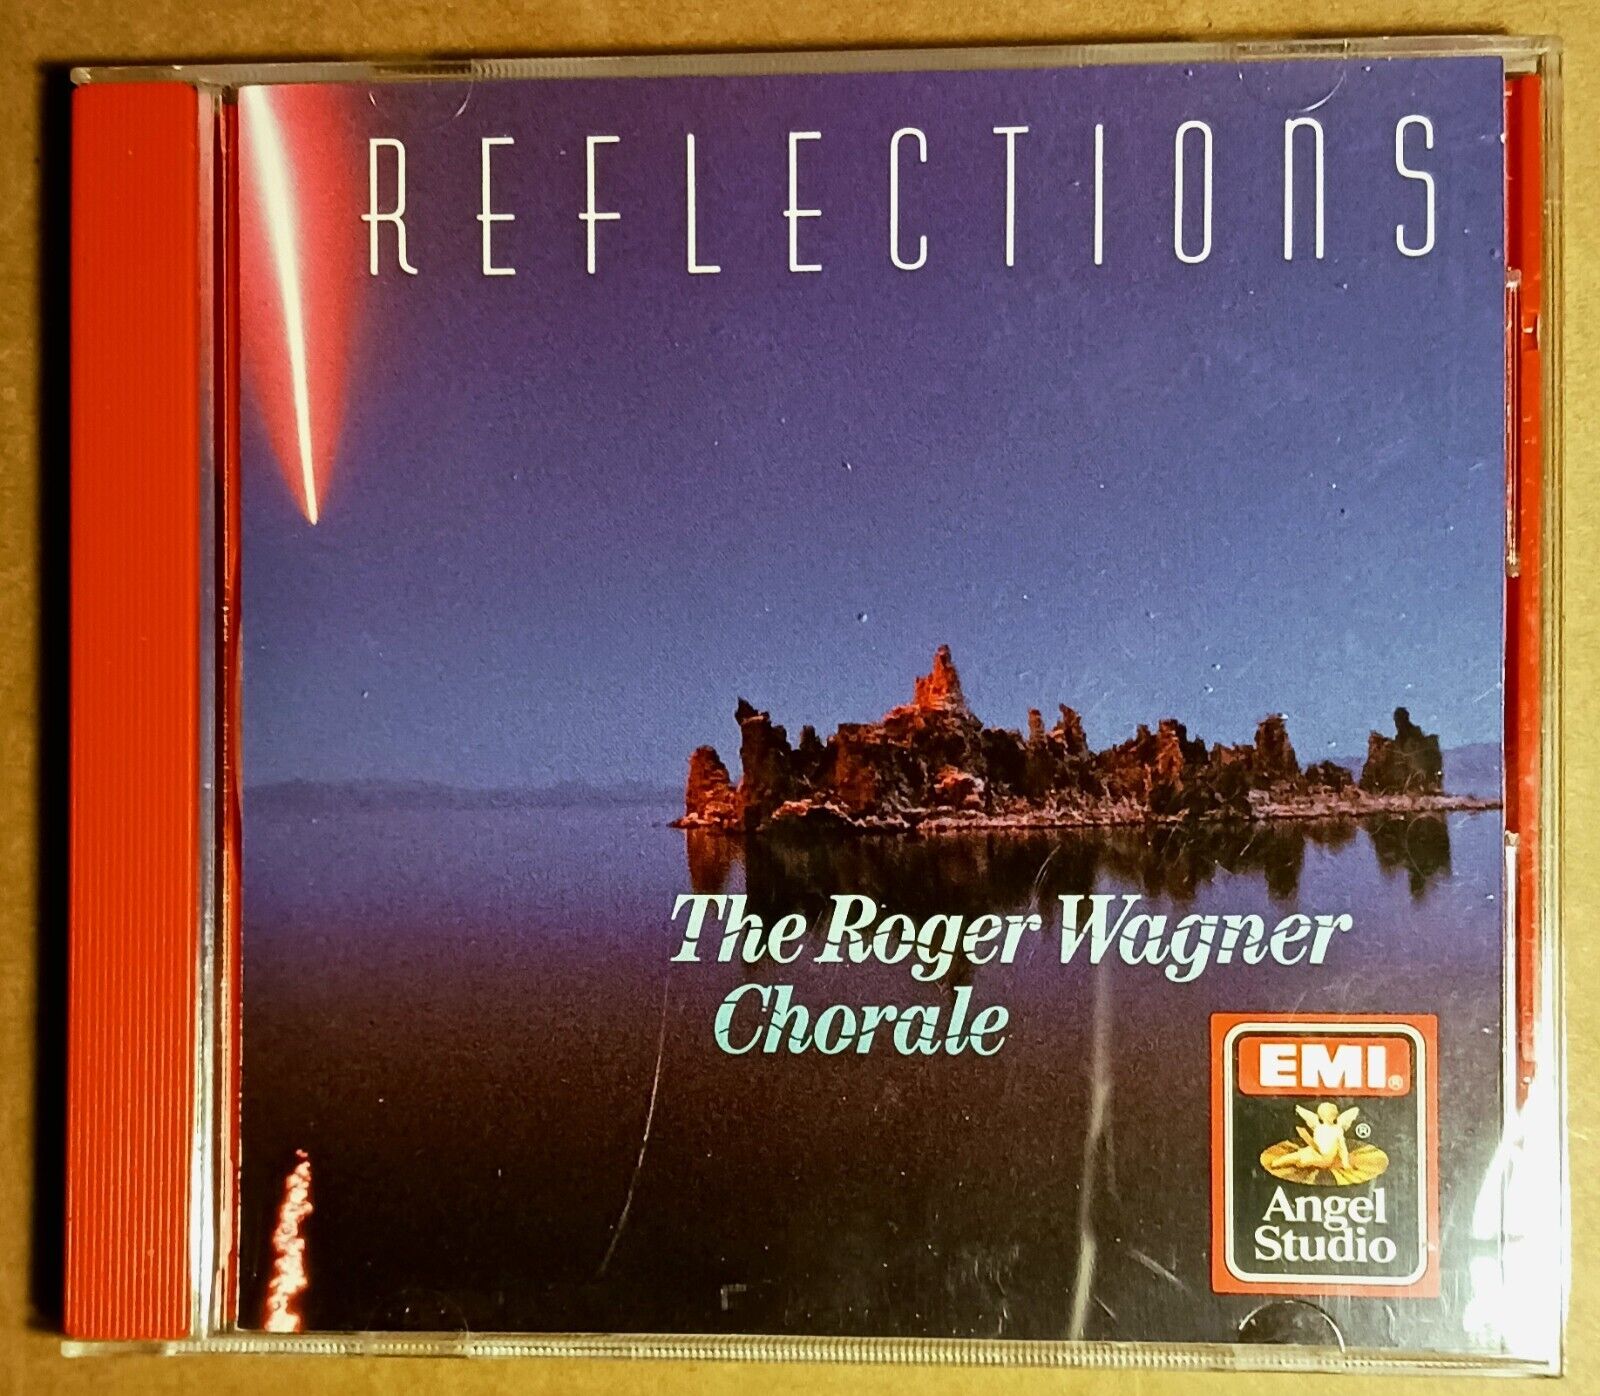 Roger Wagner Choral, Reflections CD, Jul-1990, EMI Music. Used, Mint Condition.